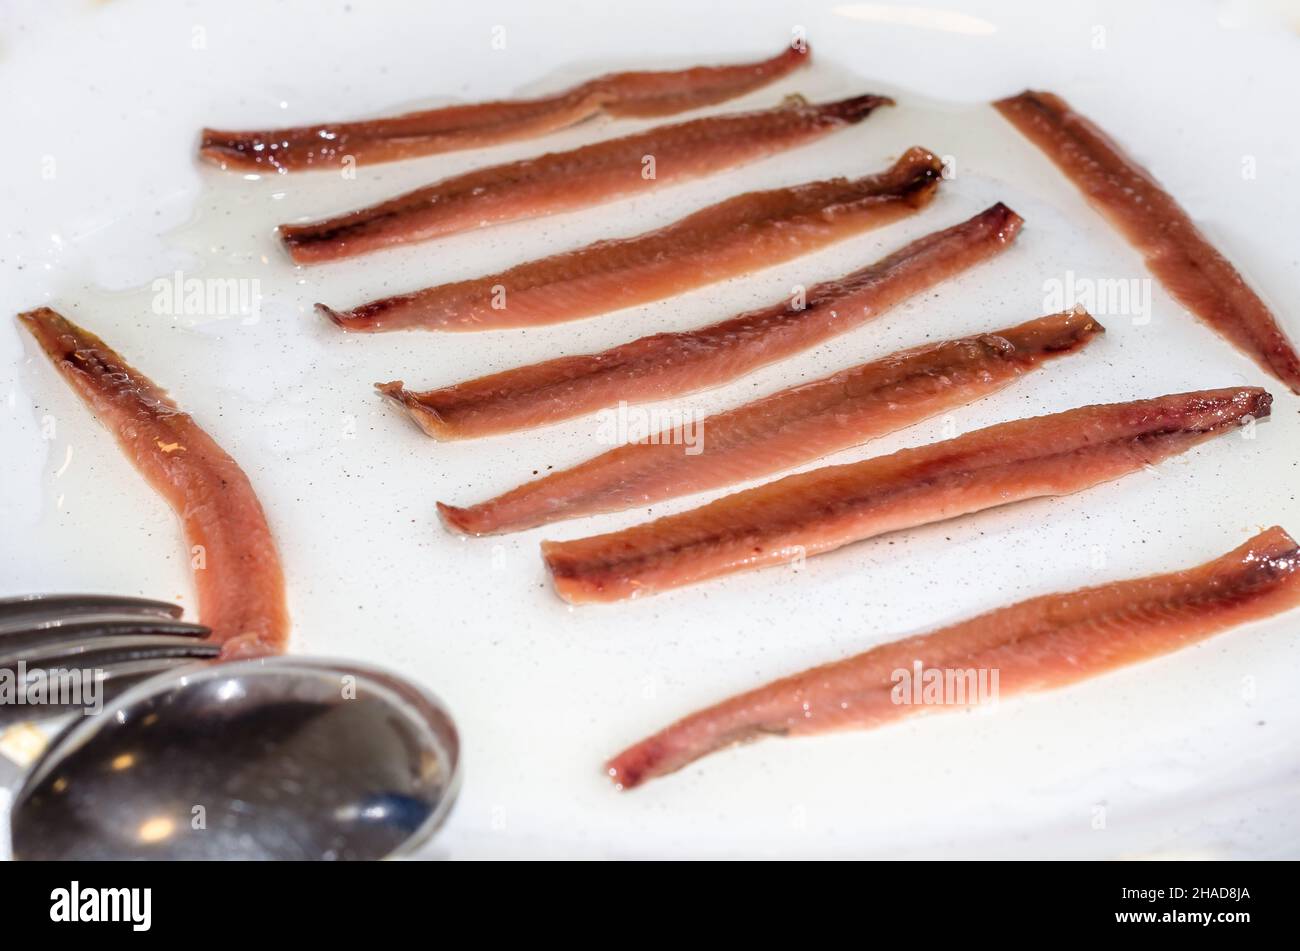 Cantabrian anchovies served as a starter, a salting preparation of anchovies (Engraulis encrasicholus); they are presented after cleaning, filleting, Stock Photo